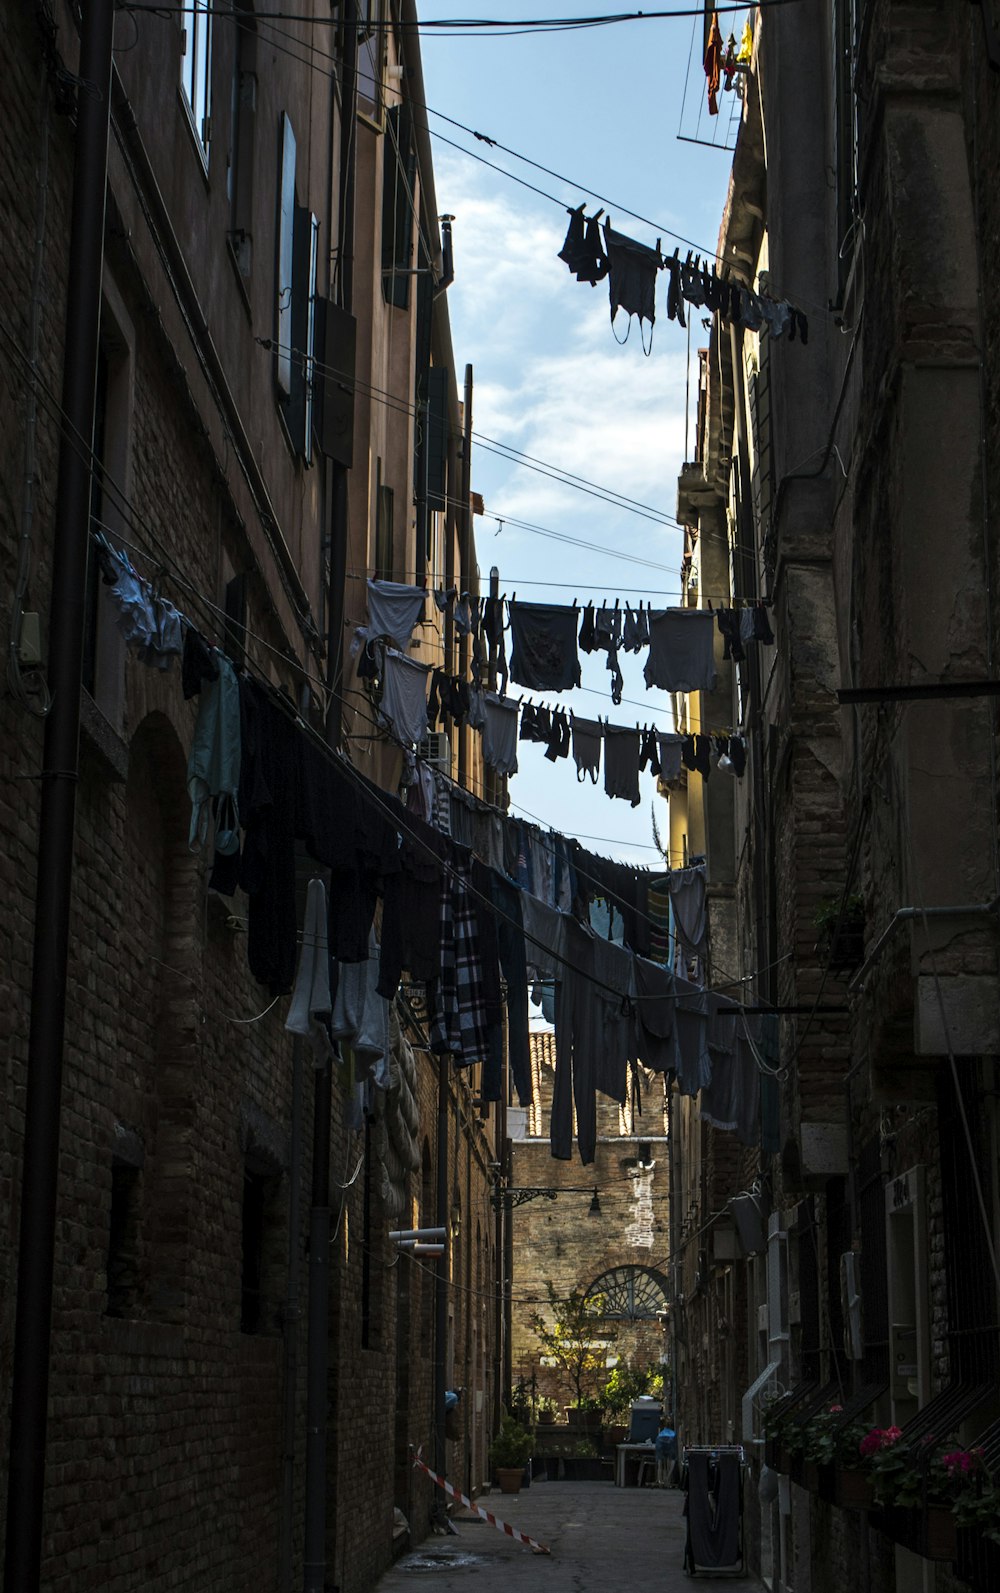 a narrow alley way with clothes hanging out to dry